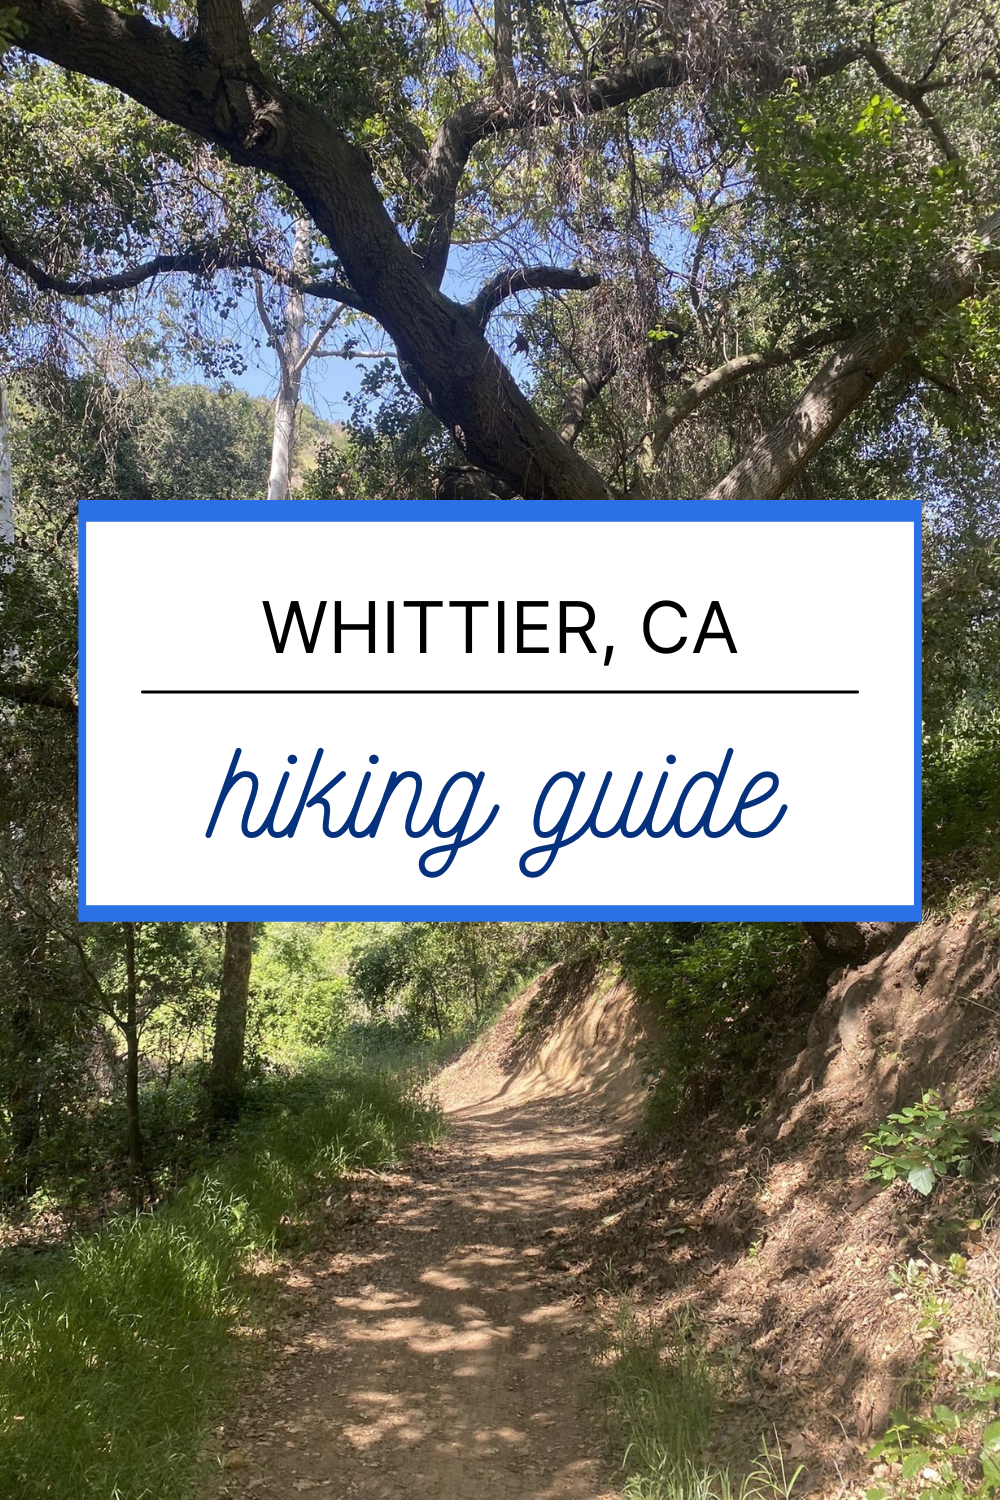 Whittier hiking trails guide